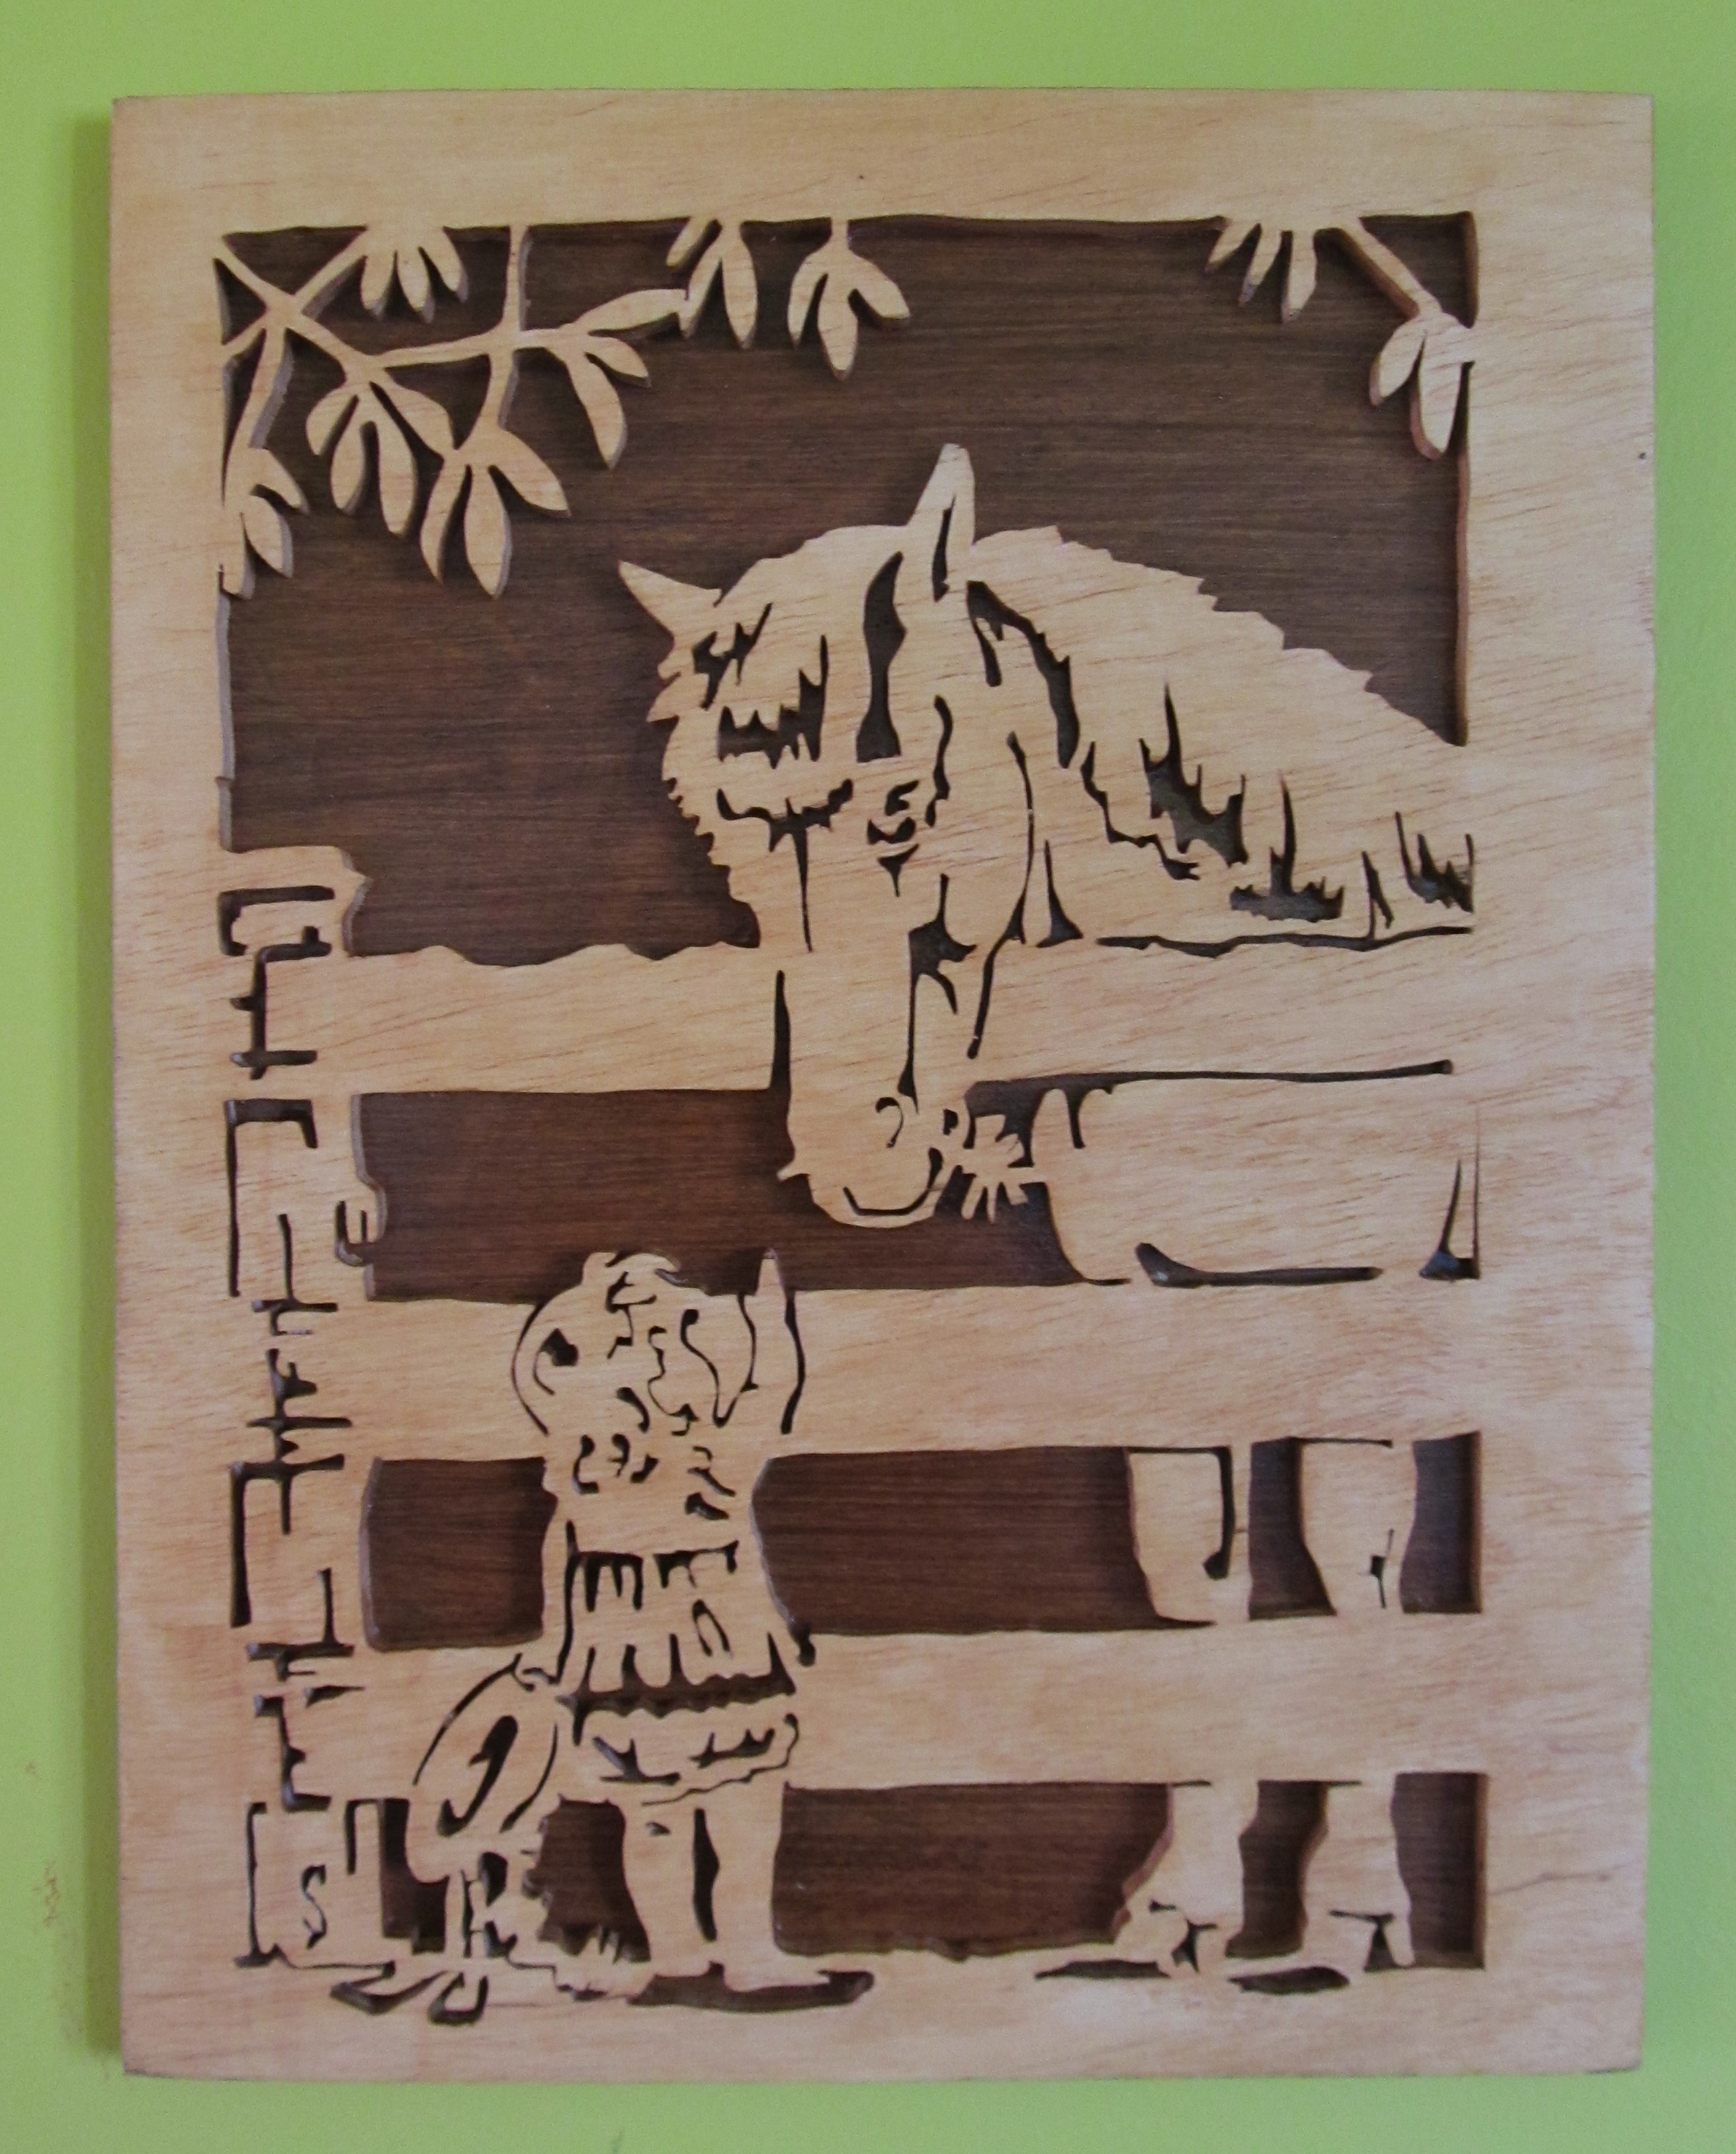 Scroll Saw Patterns and Hand Scrolled Wood Art